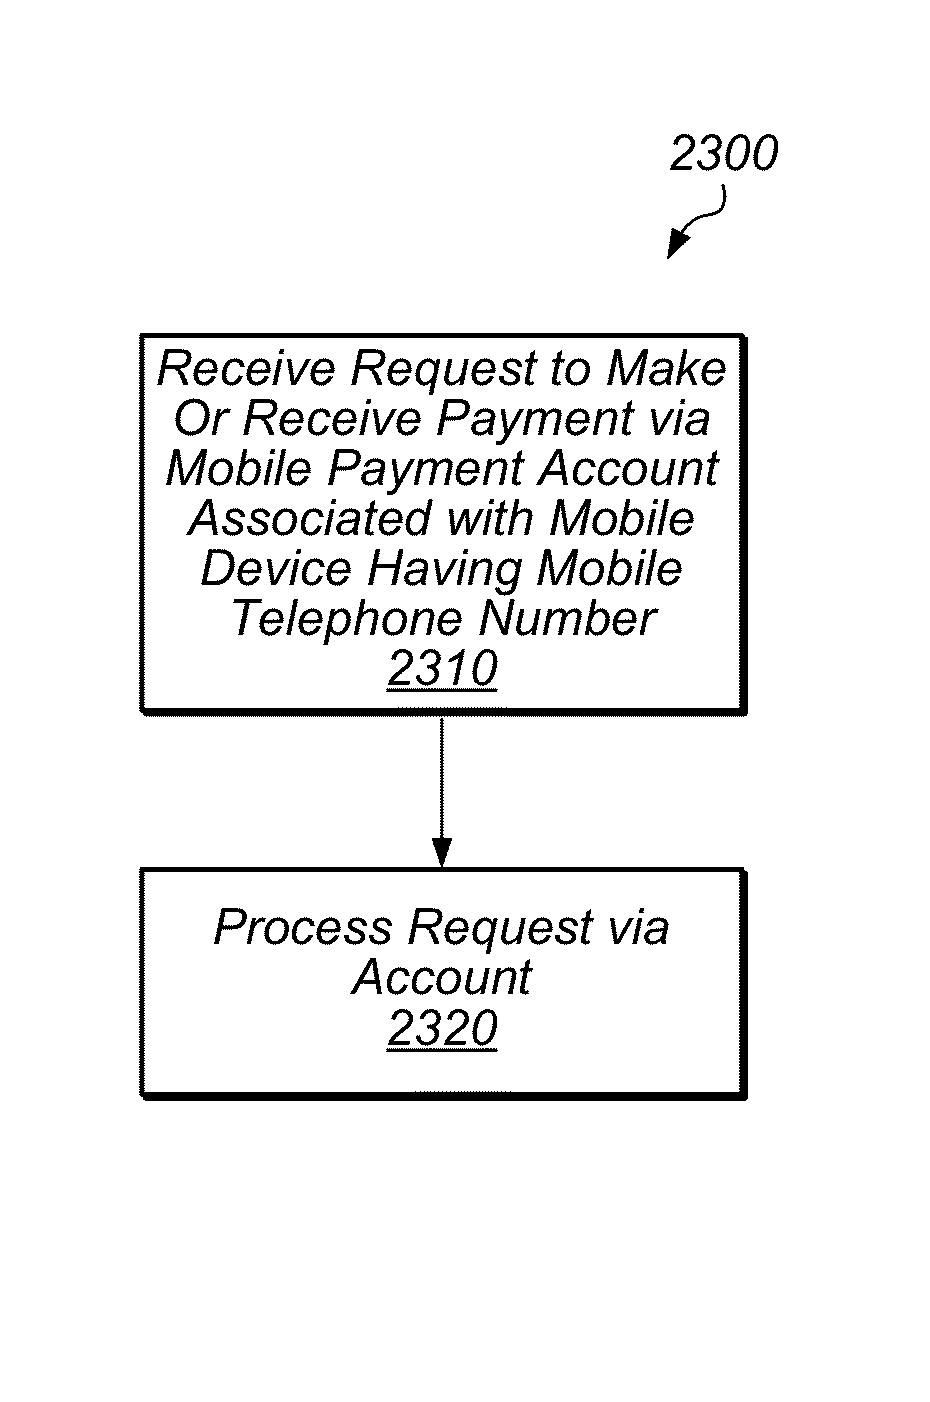 Mobile payment and identity verification system